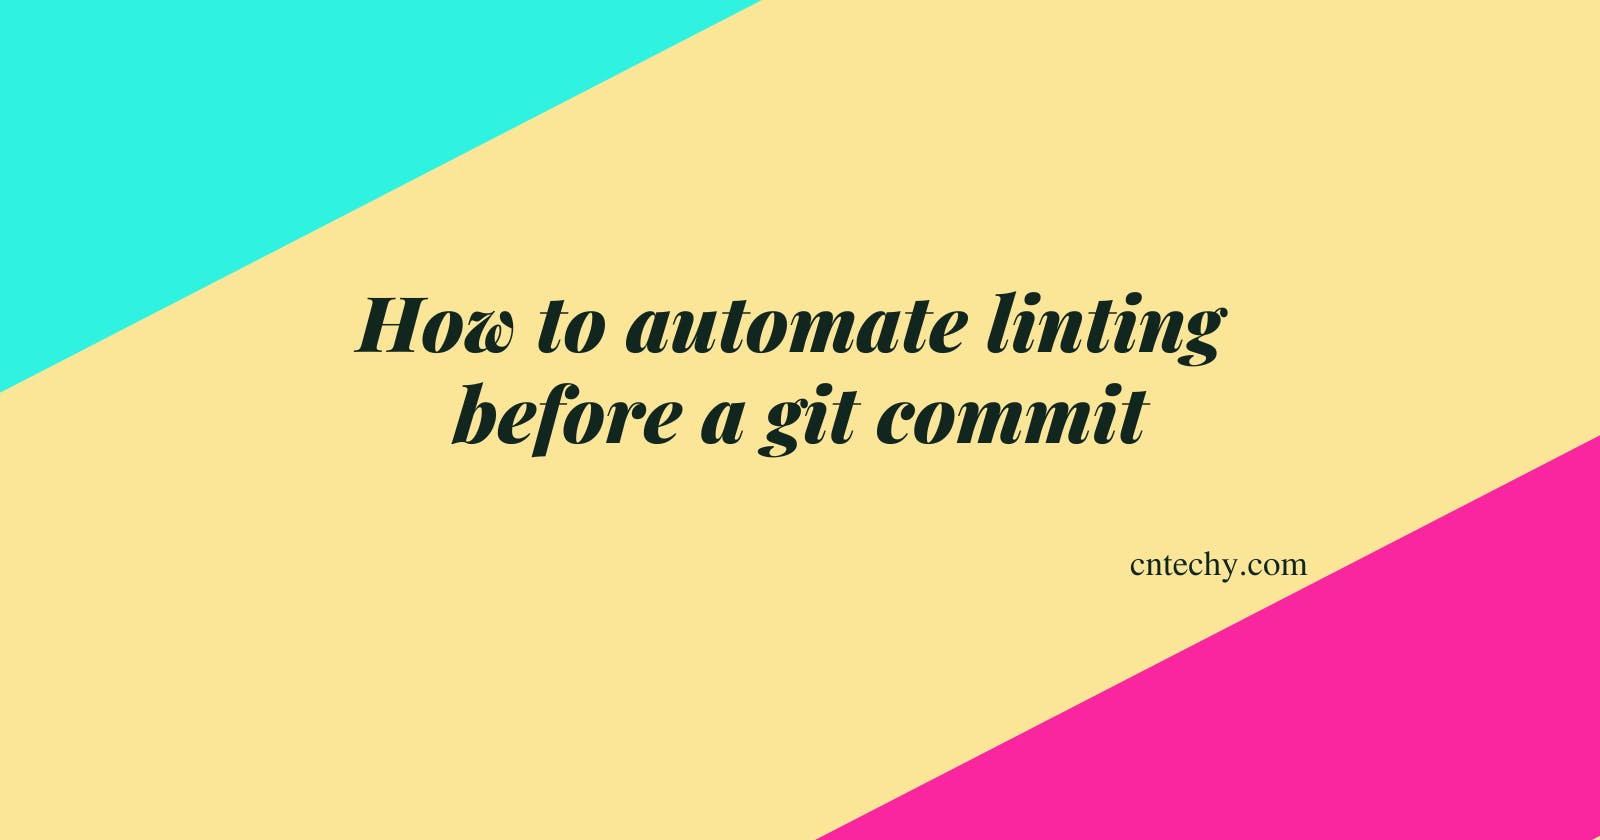 How to automate linting before a git commit